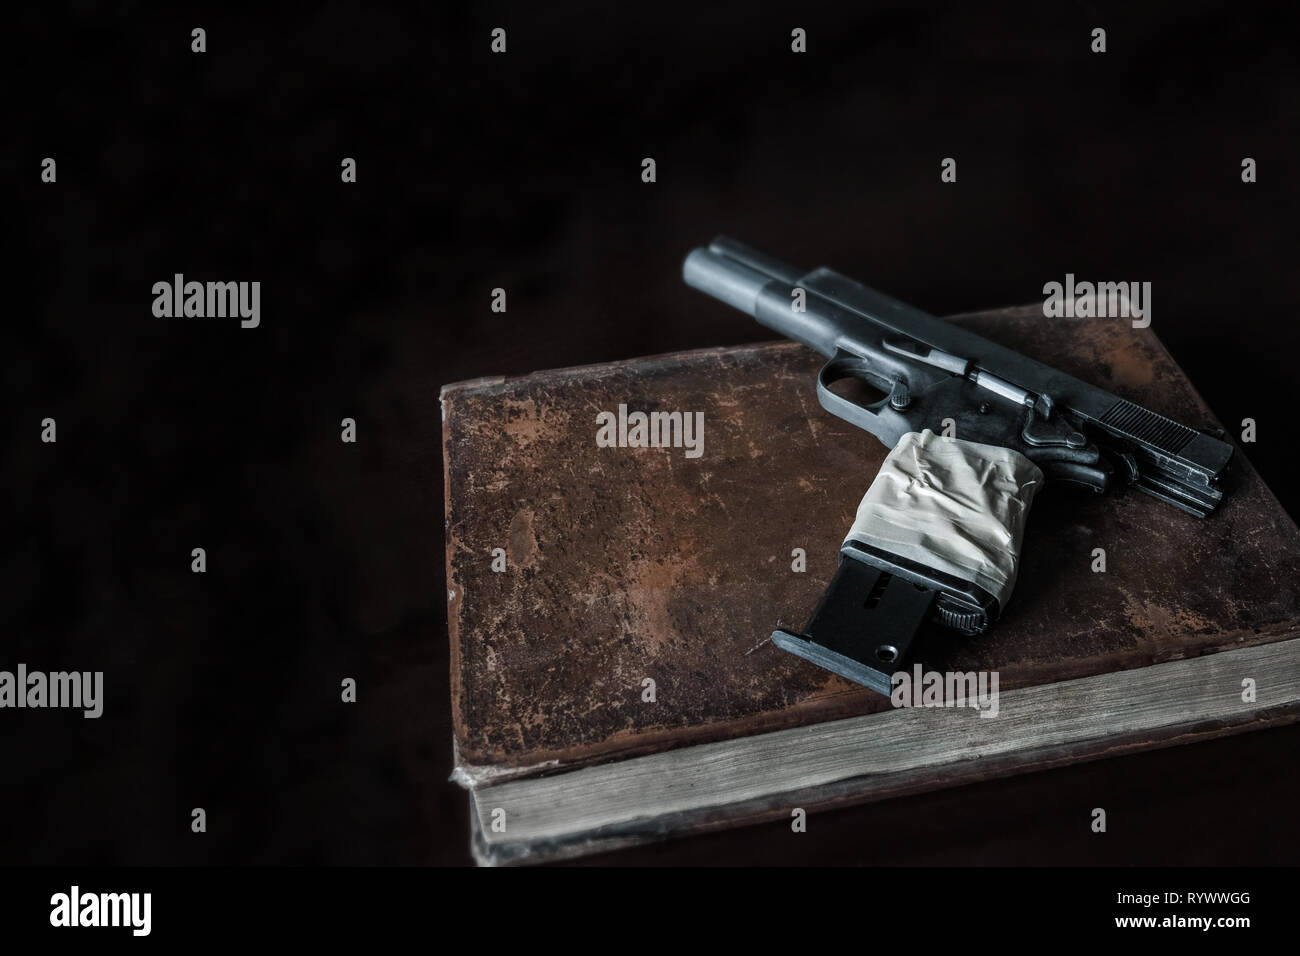 On an old book, probably a book of wisdom, a pistol whose handle is wrapped with tape. Low key, copy space. Stock Photo